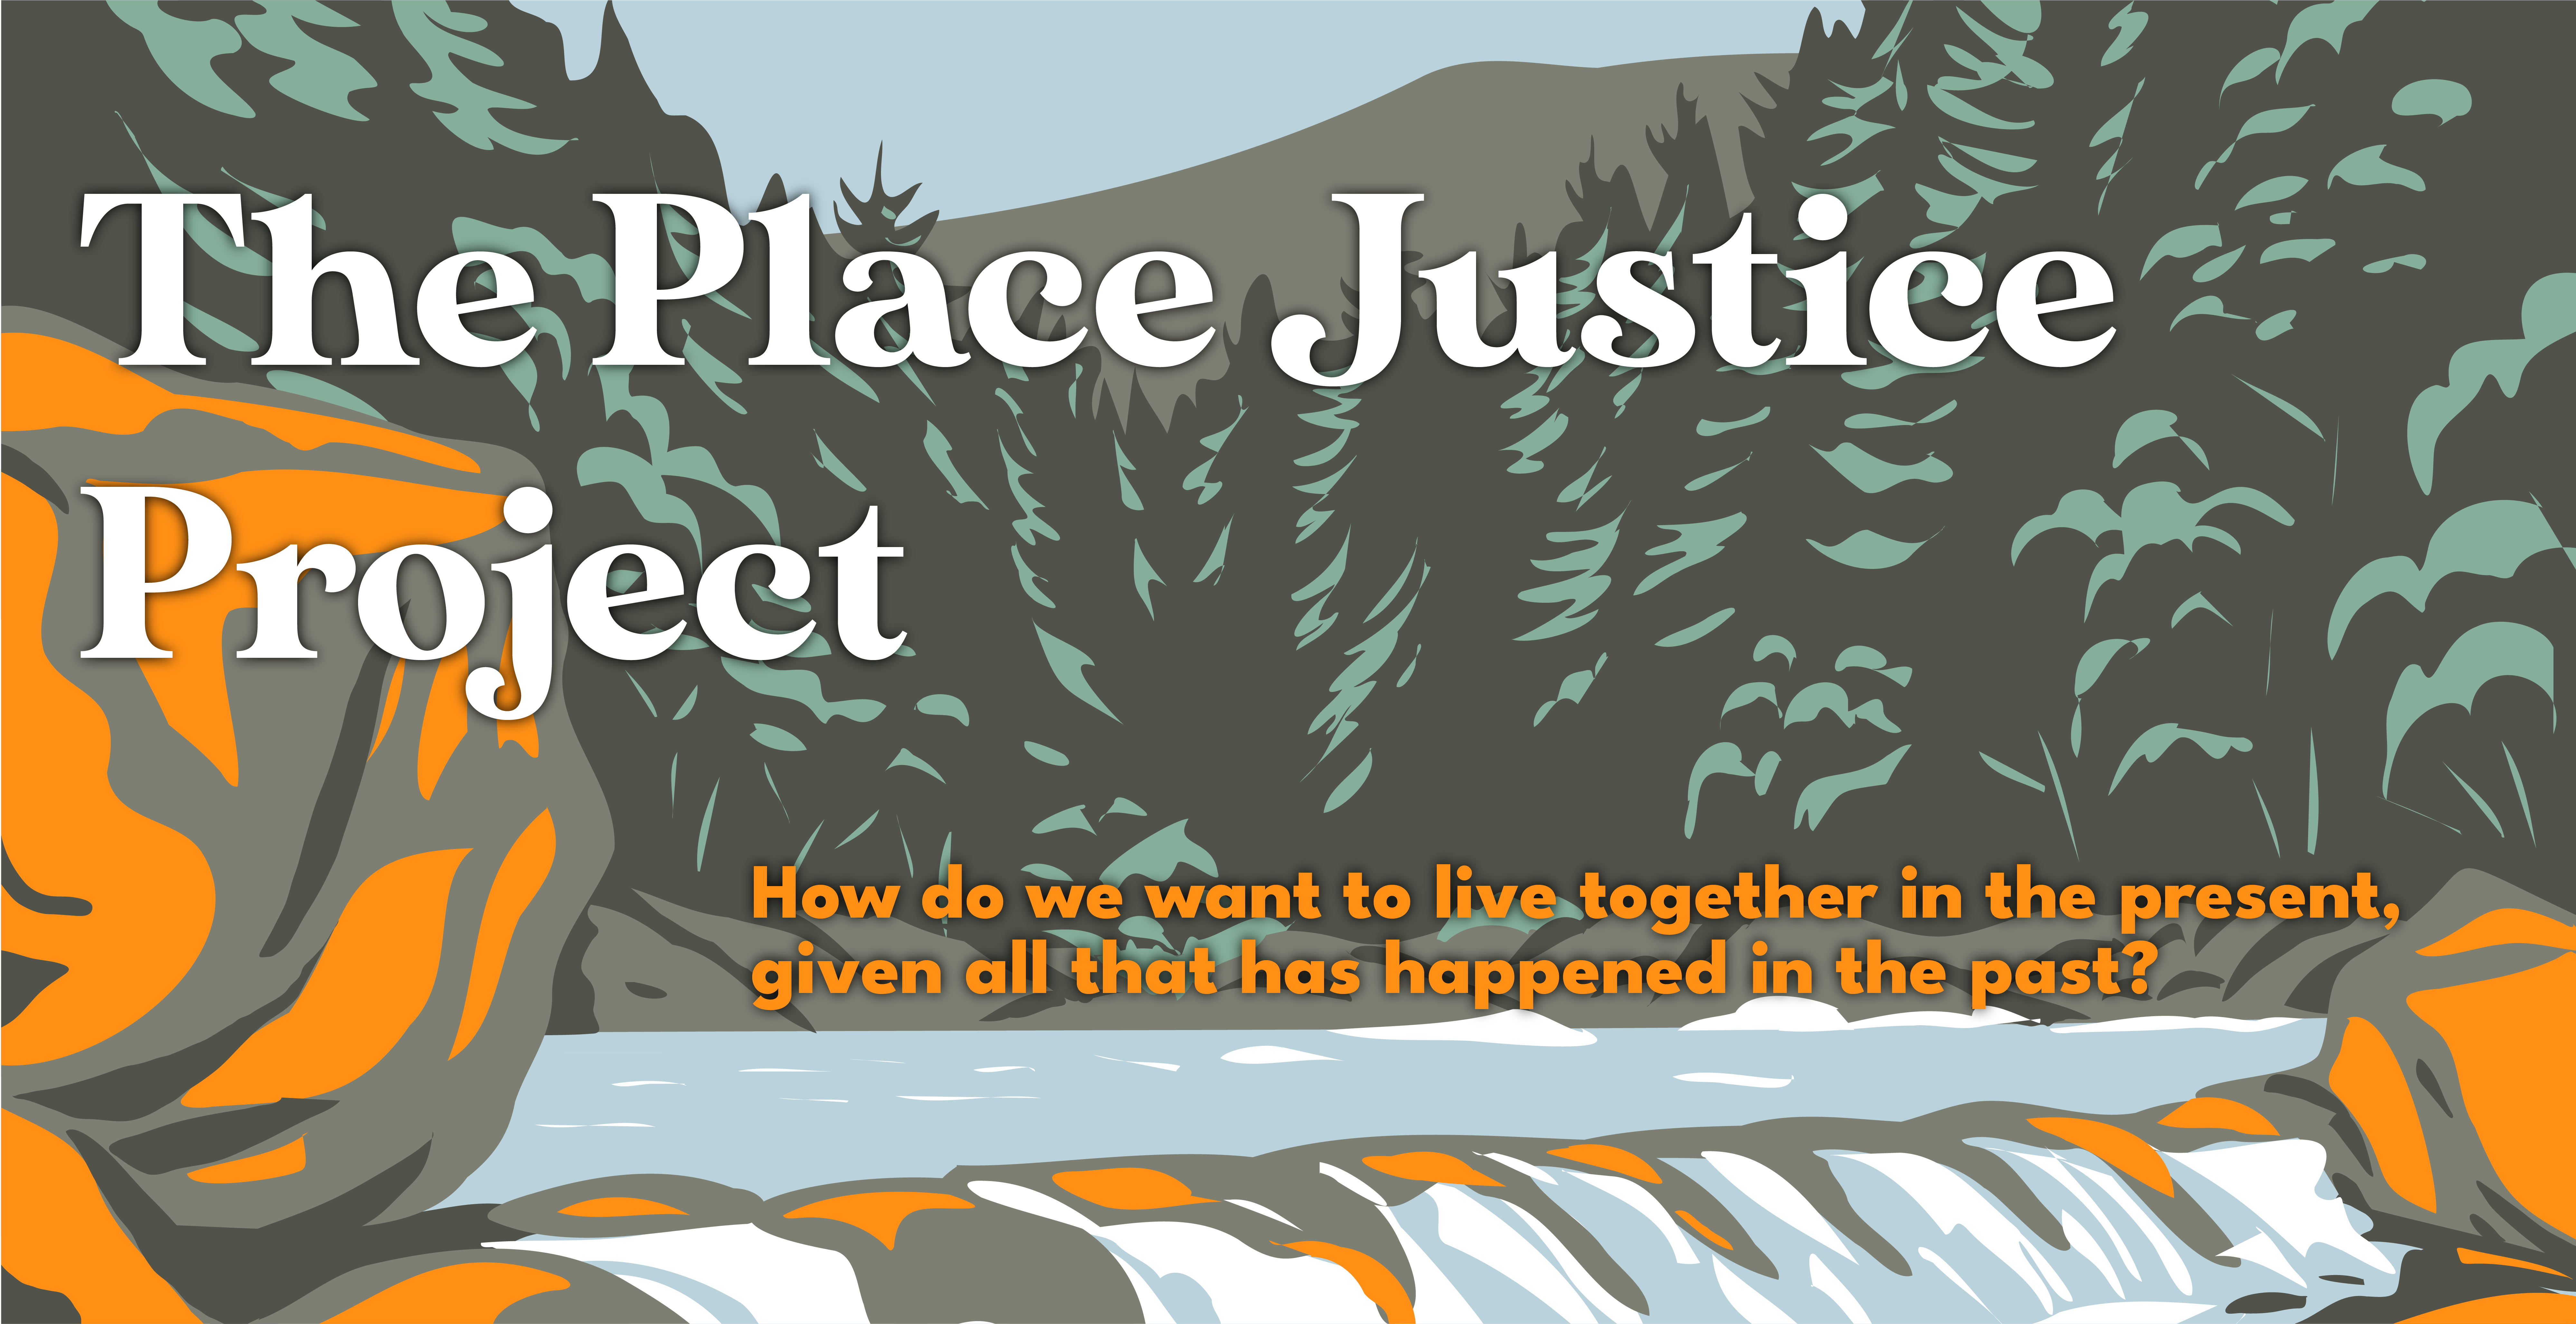 The Place Justice Project: How do we want to live together in the present, given all that has happened in the past?